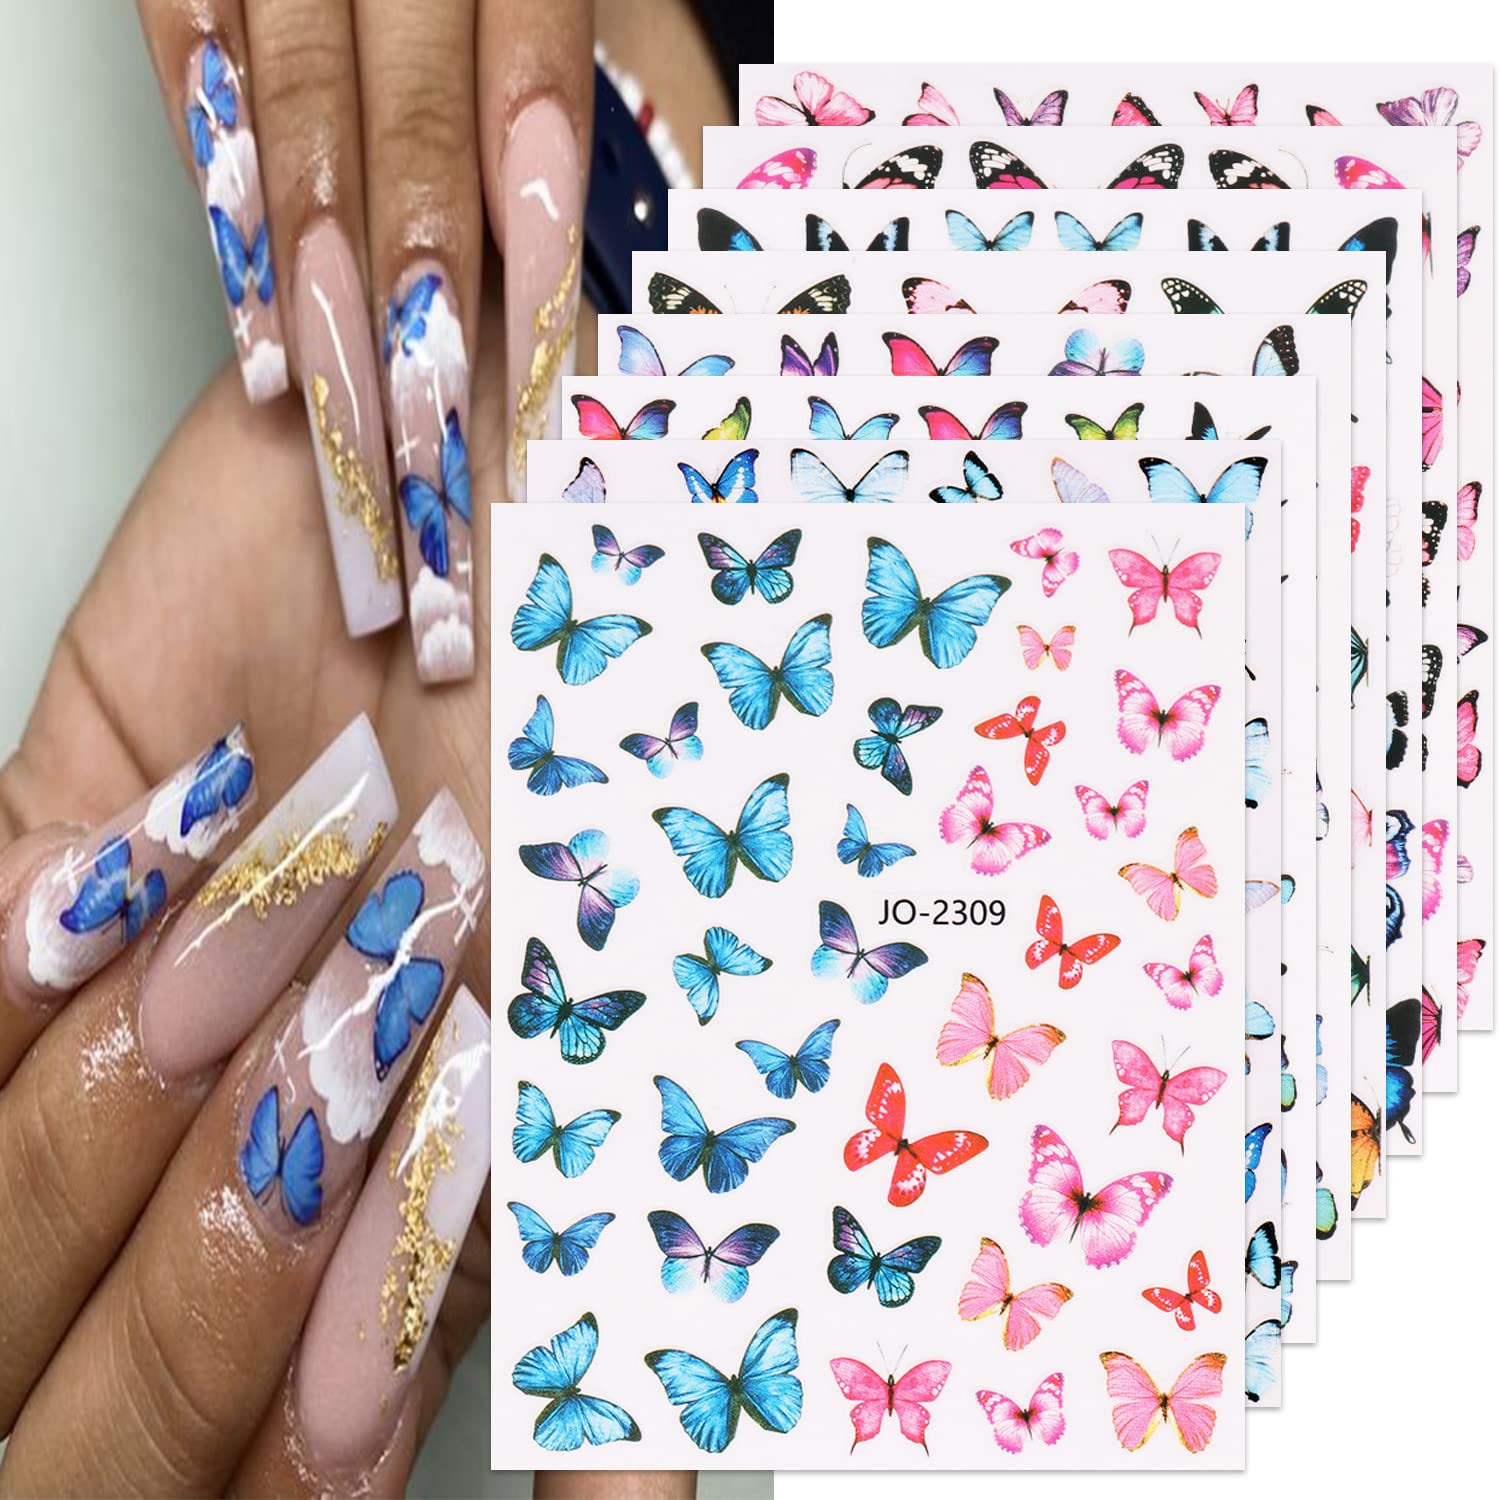 Butterfly Nail Art Stickers 3D Self Adhesive Butterfly Designs Nail Art  Decals Pink Blue Colorful Butterflies Wings Designer Nail Stickers for  Women Girls Nail Art Decoration 8 Sheets S7